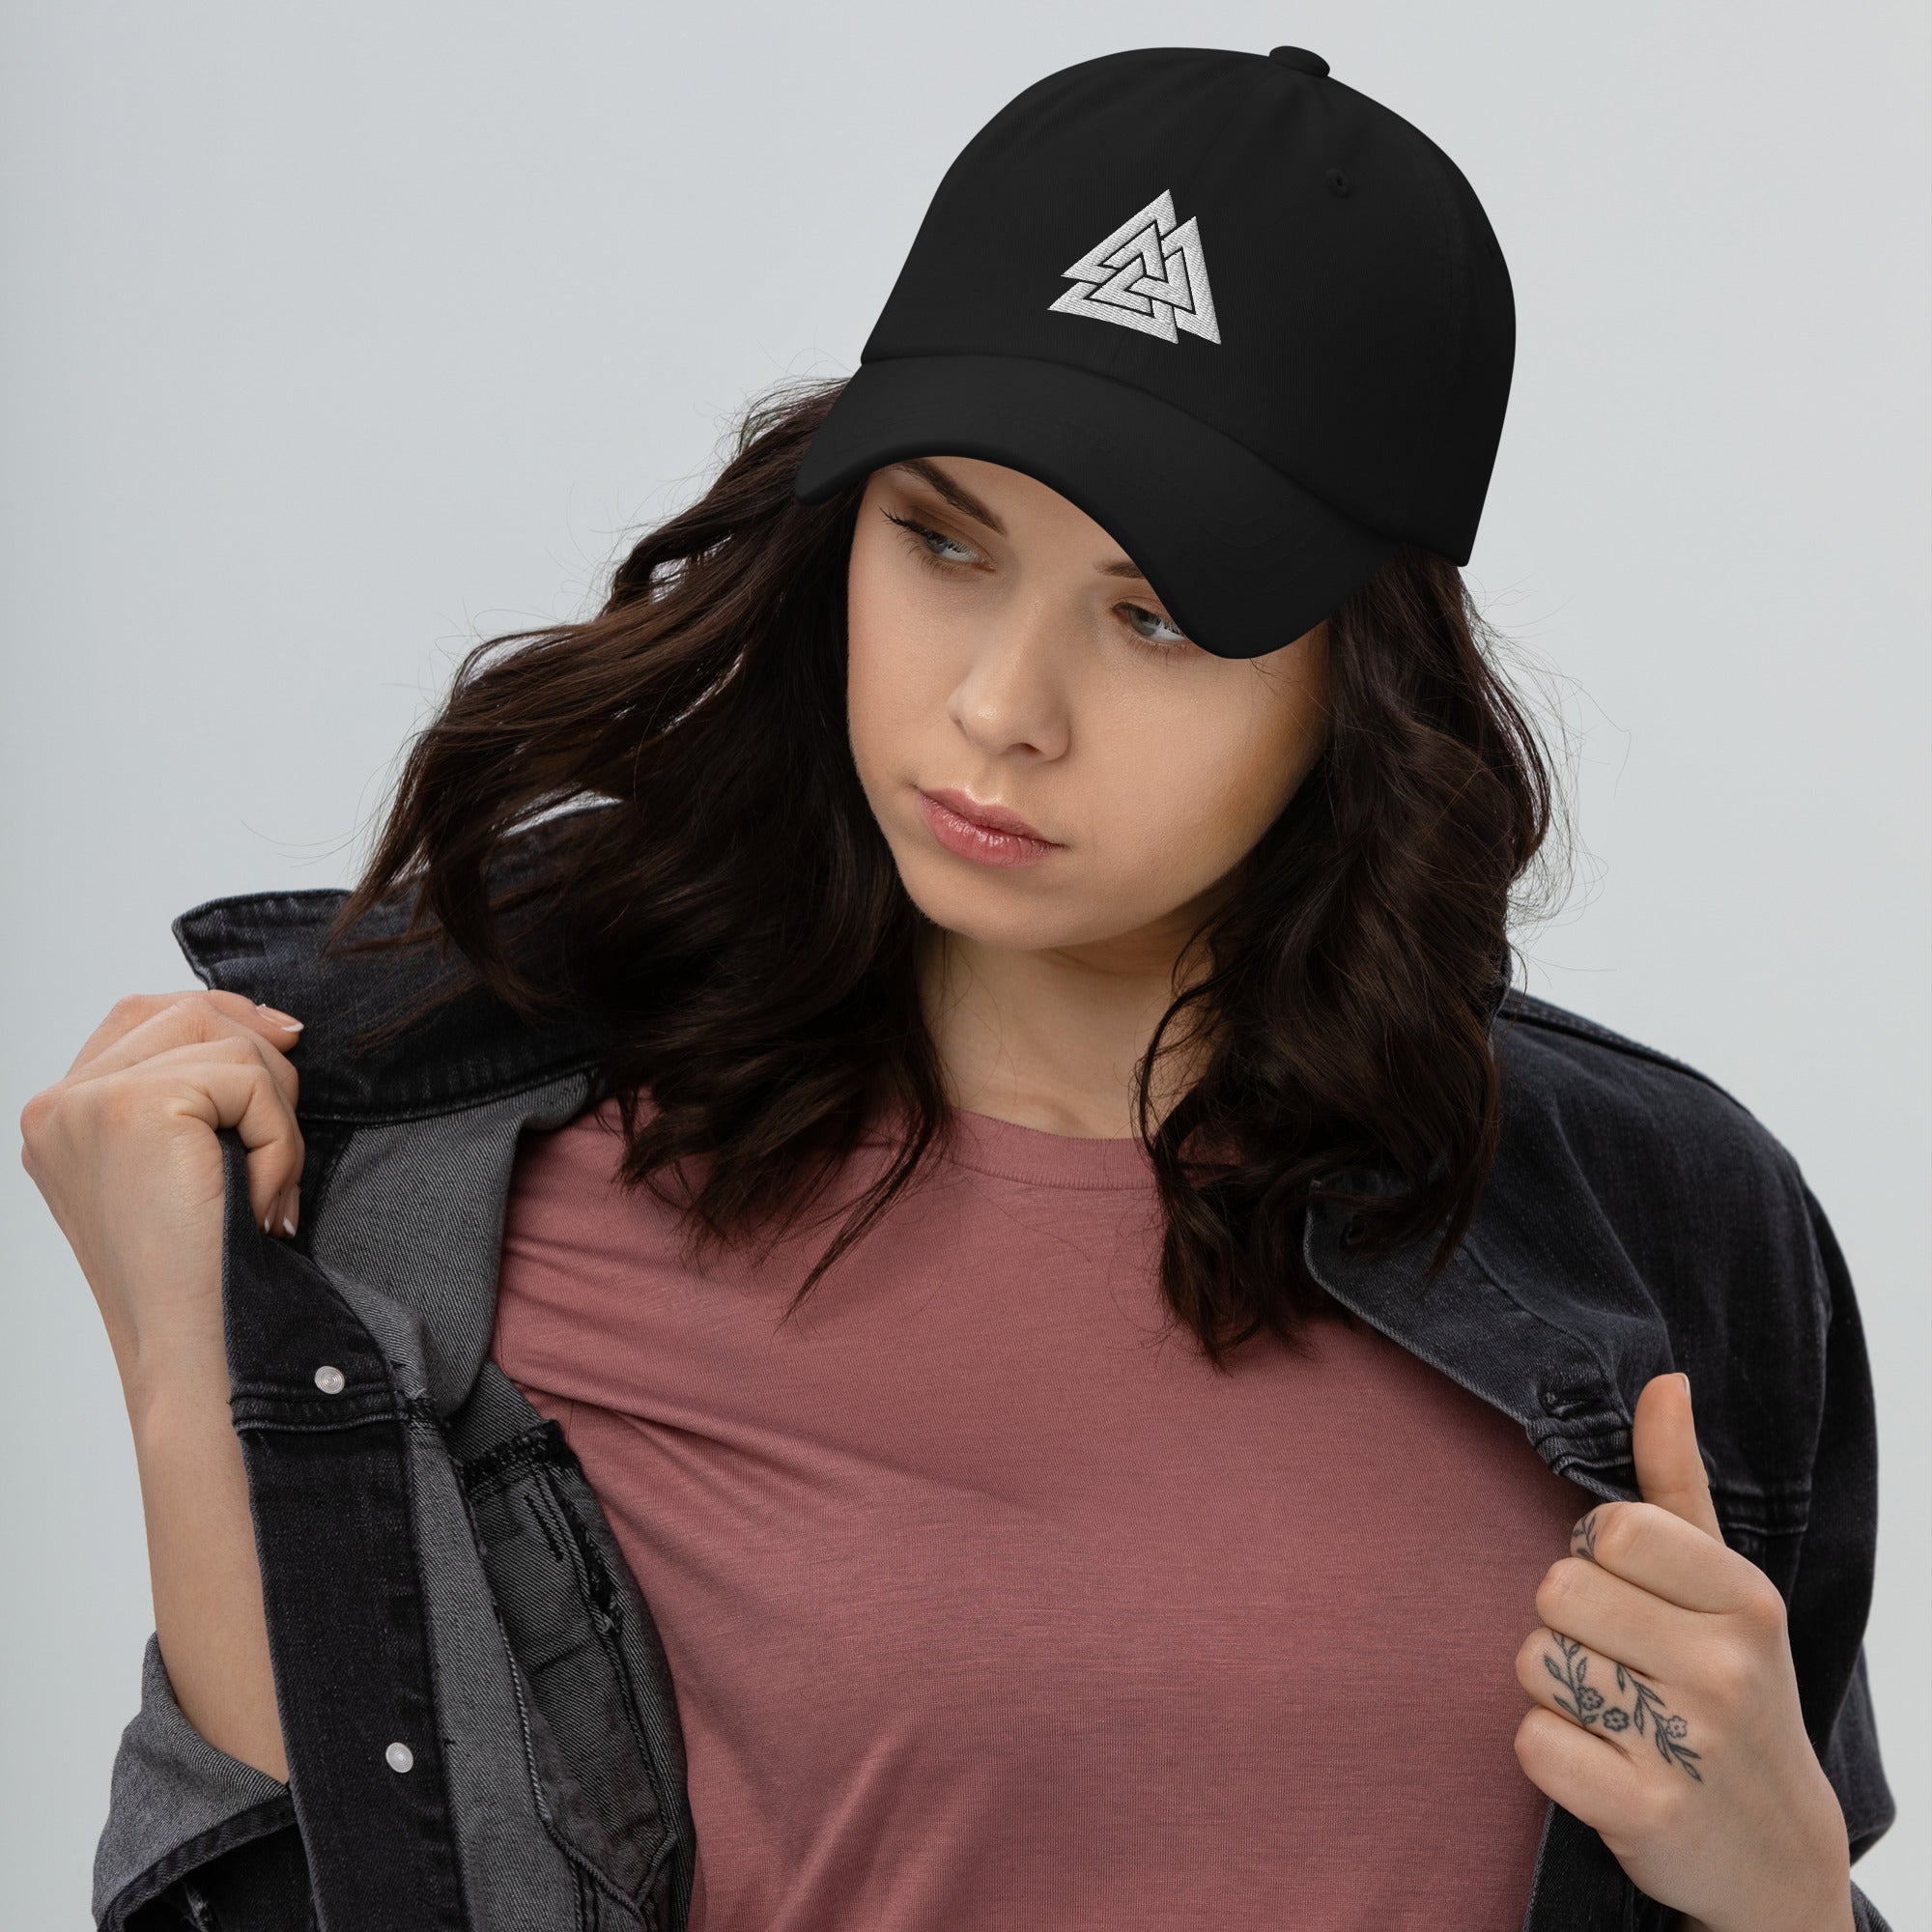 Viking Symbol Valknut Triangles of Power and Glory Embroidered Baseball Cap Dad hat - Edge of Life Designs